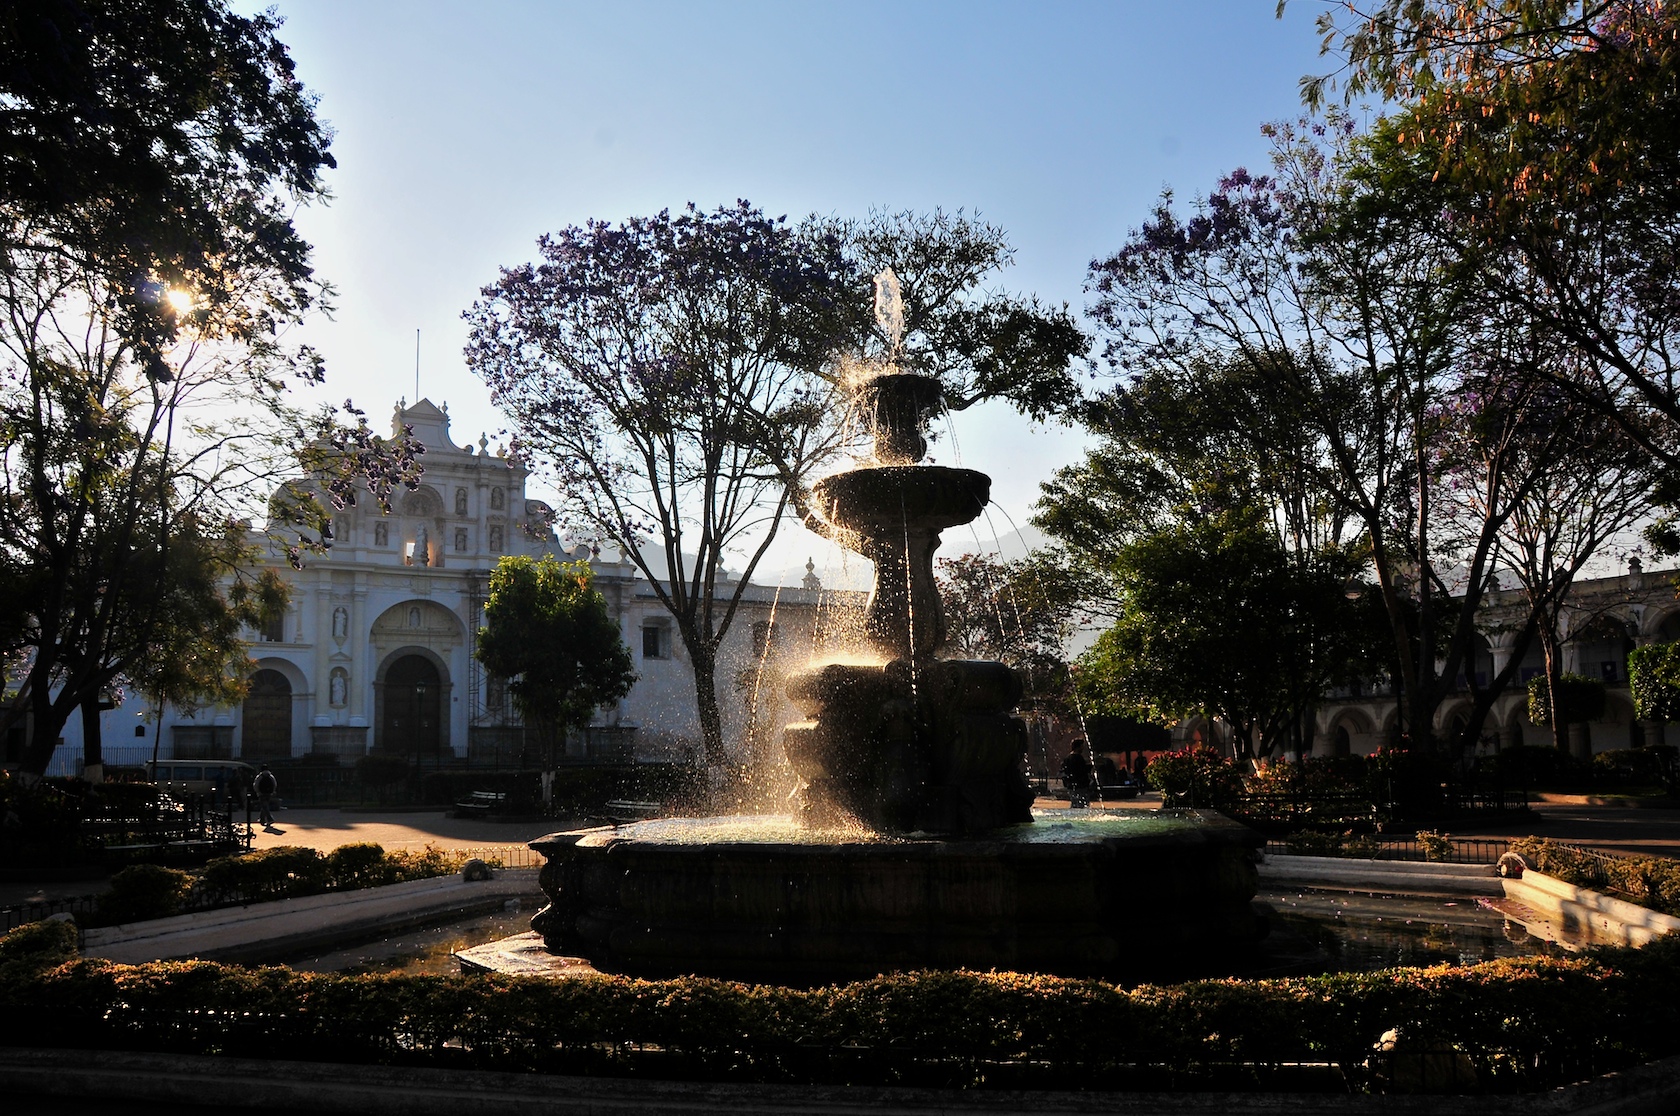 View of the Cathedral de San José from Central Park and a detail of <i>Mermaids fountain</i>.